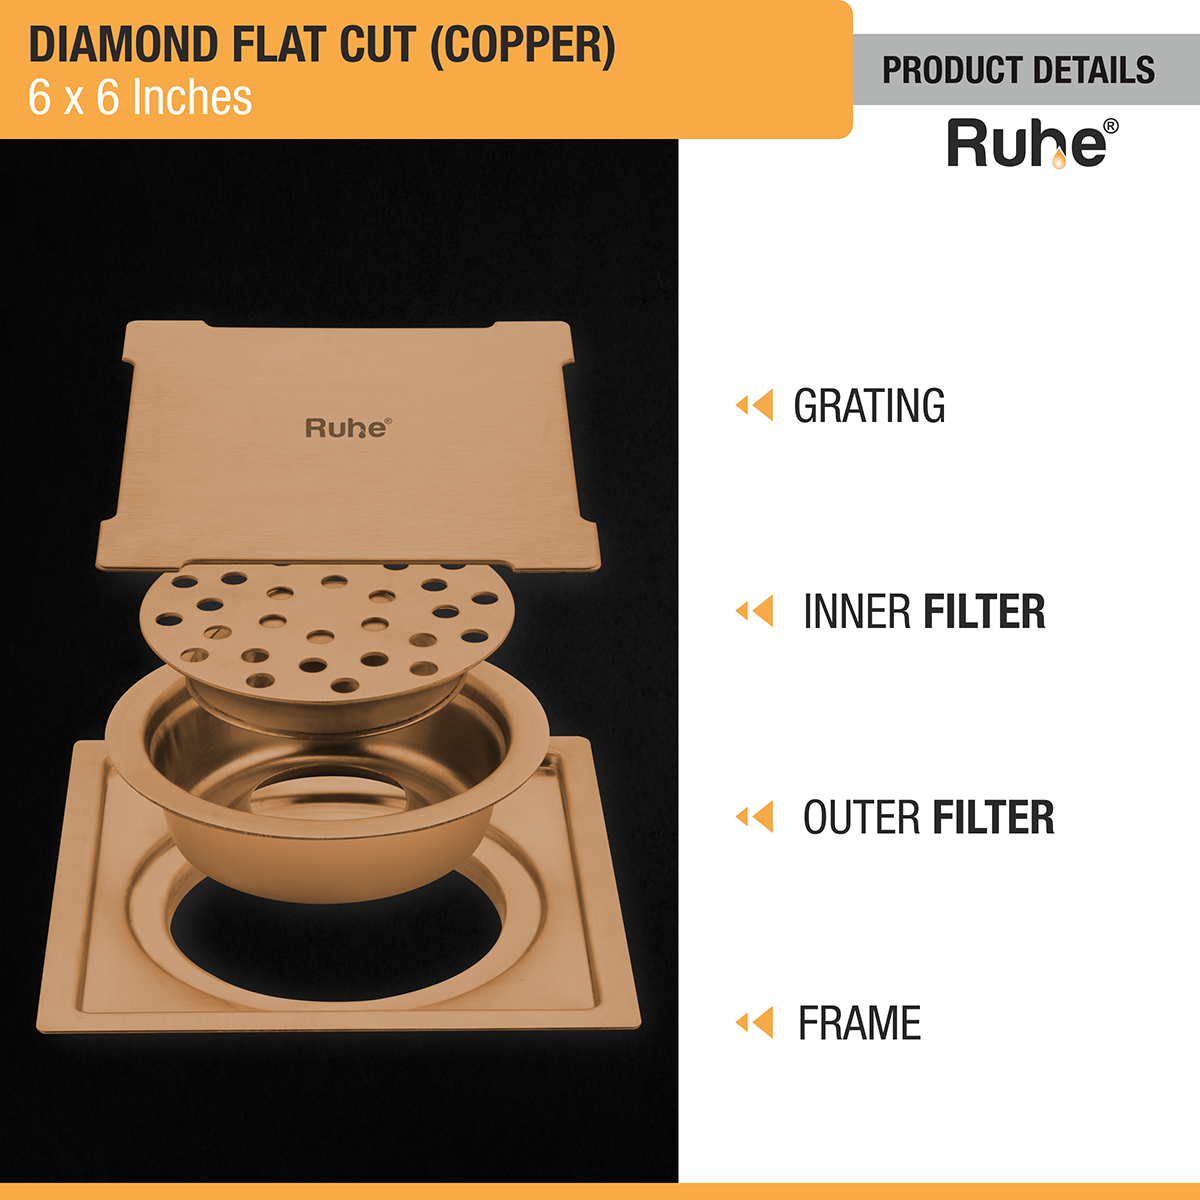 Diamond Square Flat Cut Floor Drain in Antique Copper PVD Coating (6 x 6 Inches) product details